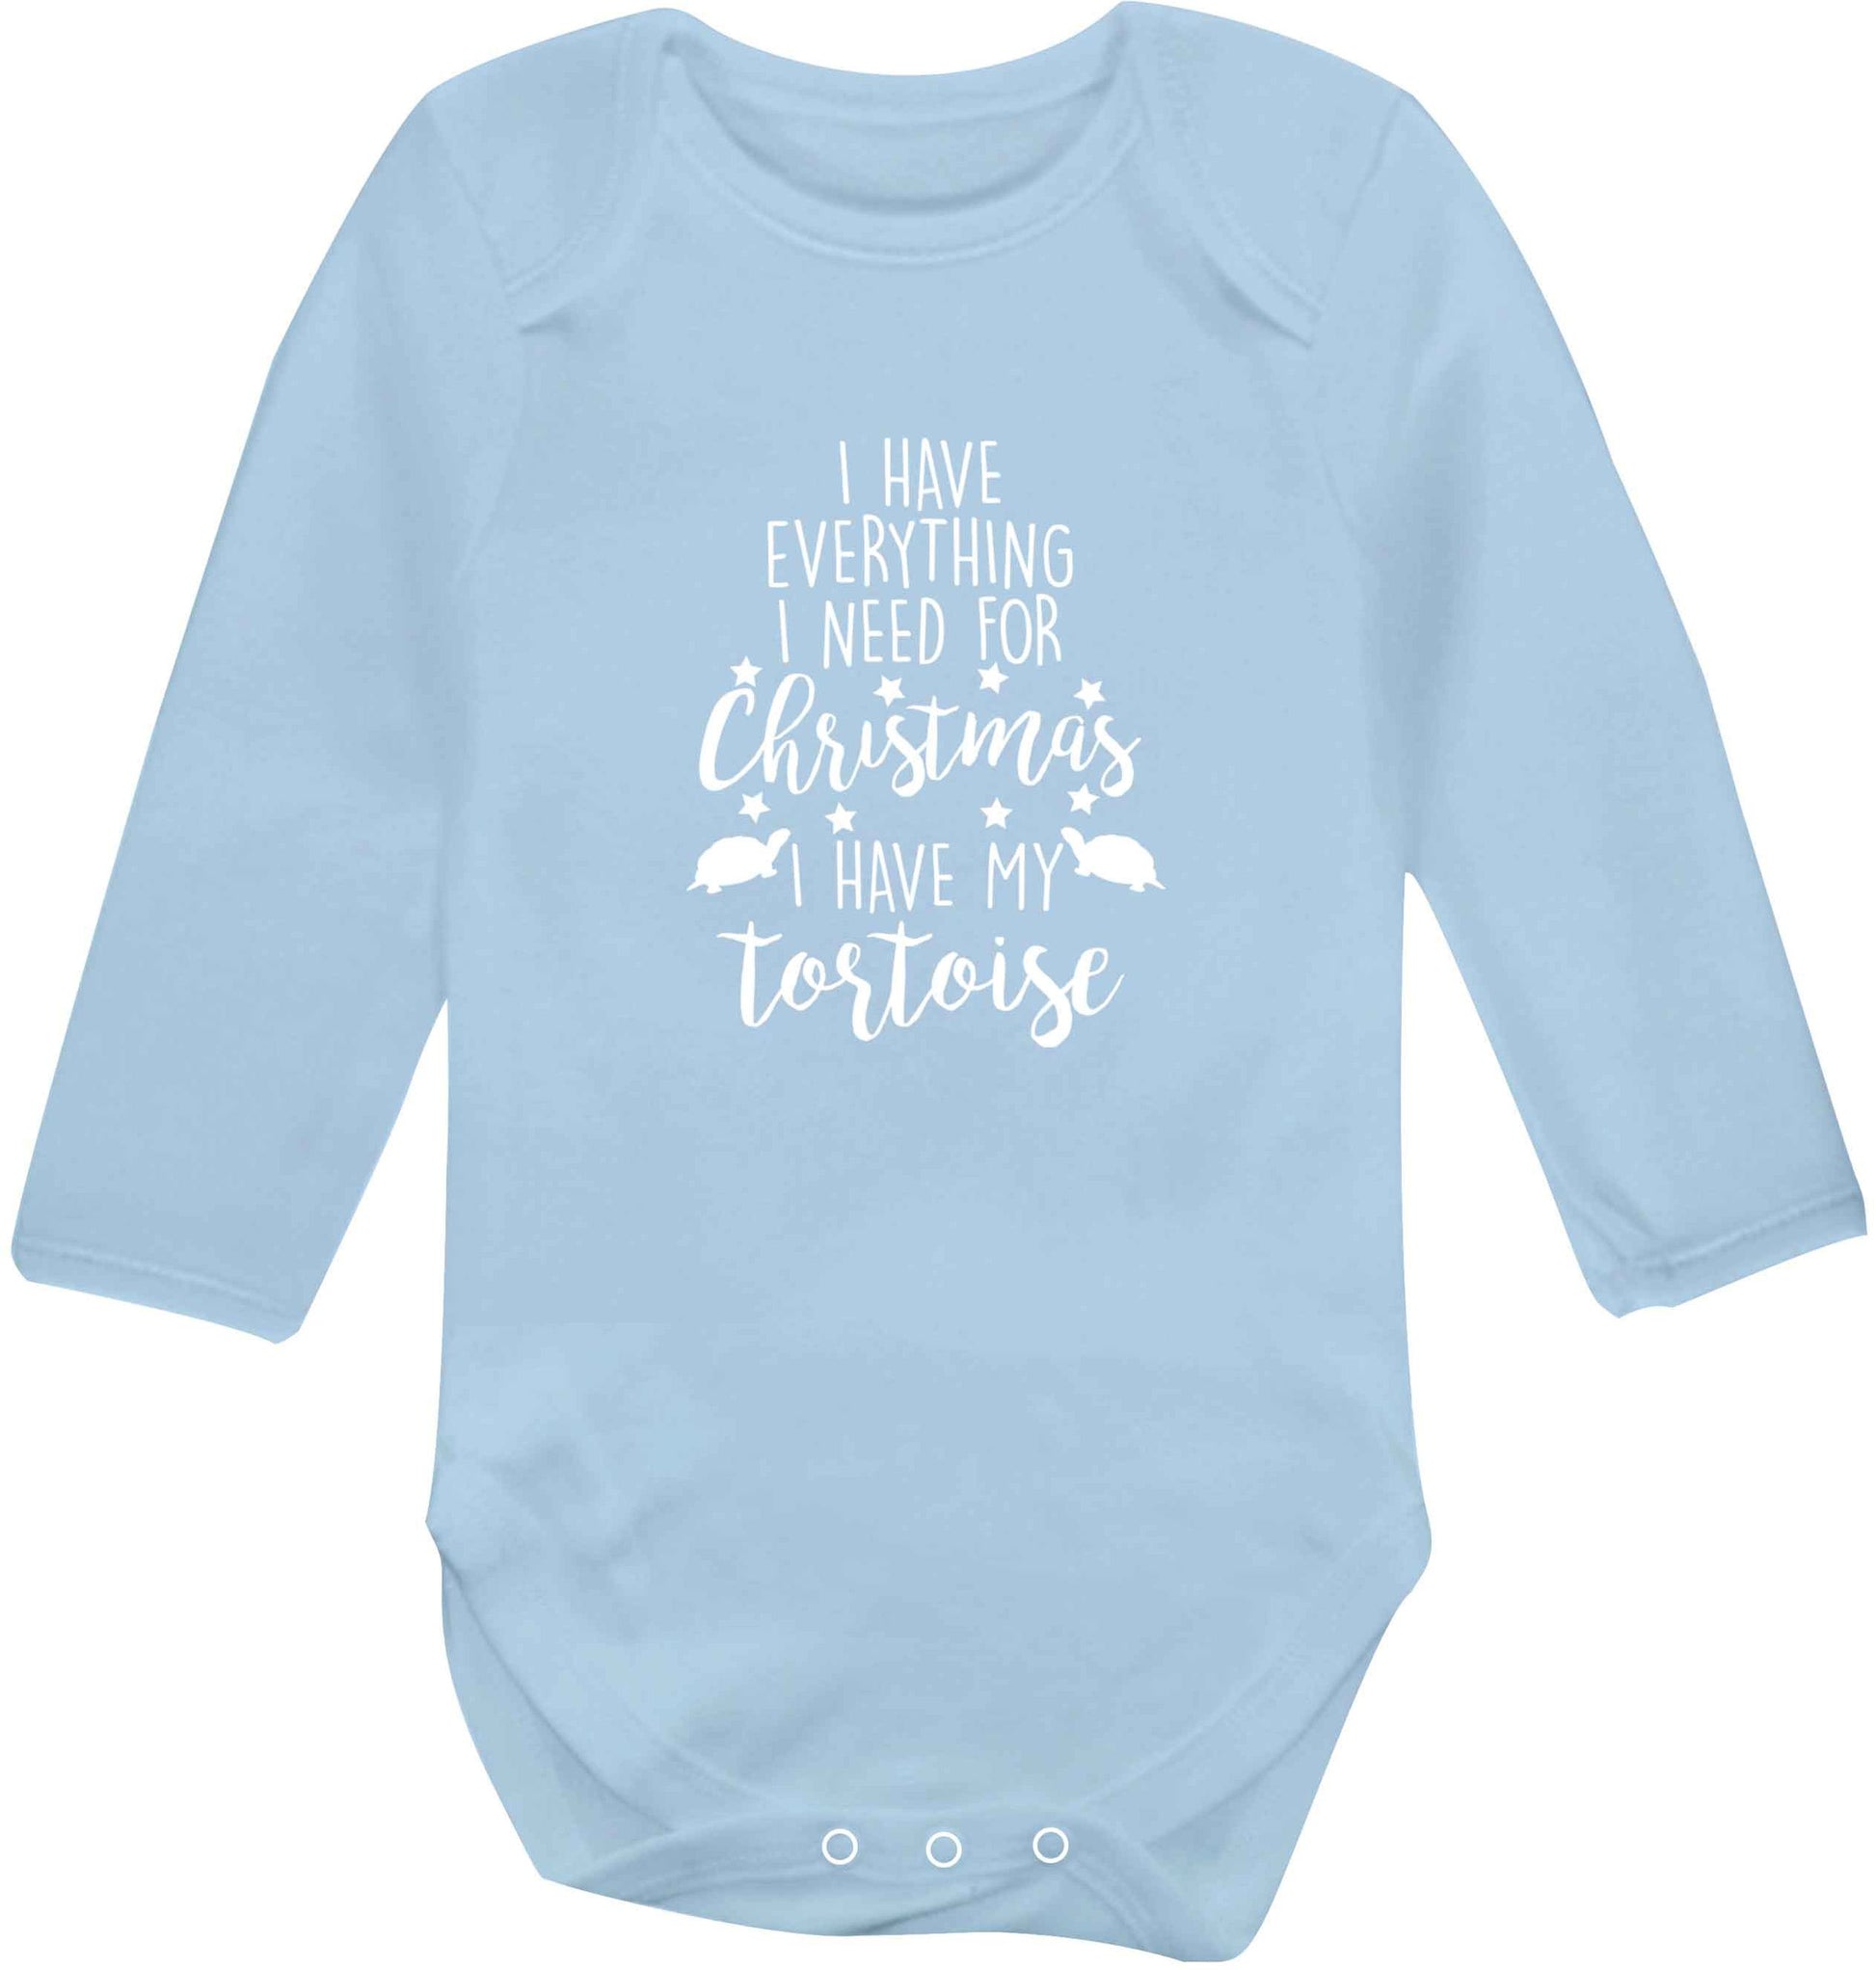 I have everything I need for Christmas I have my tortoise baby vest long sleeved pale blue 6-12 months